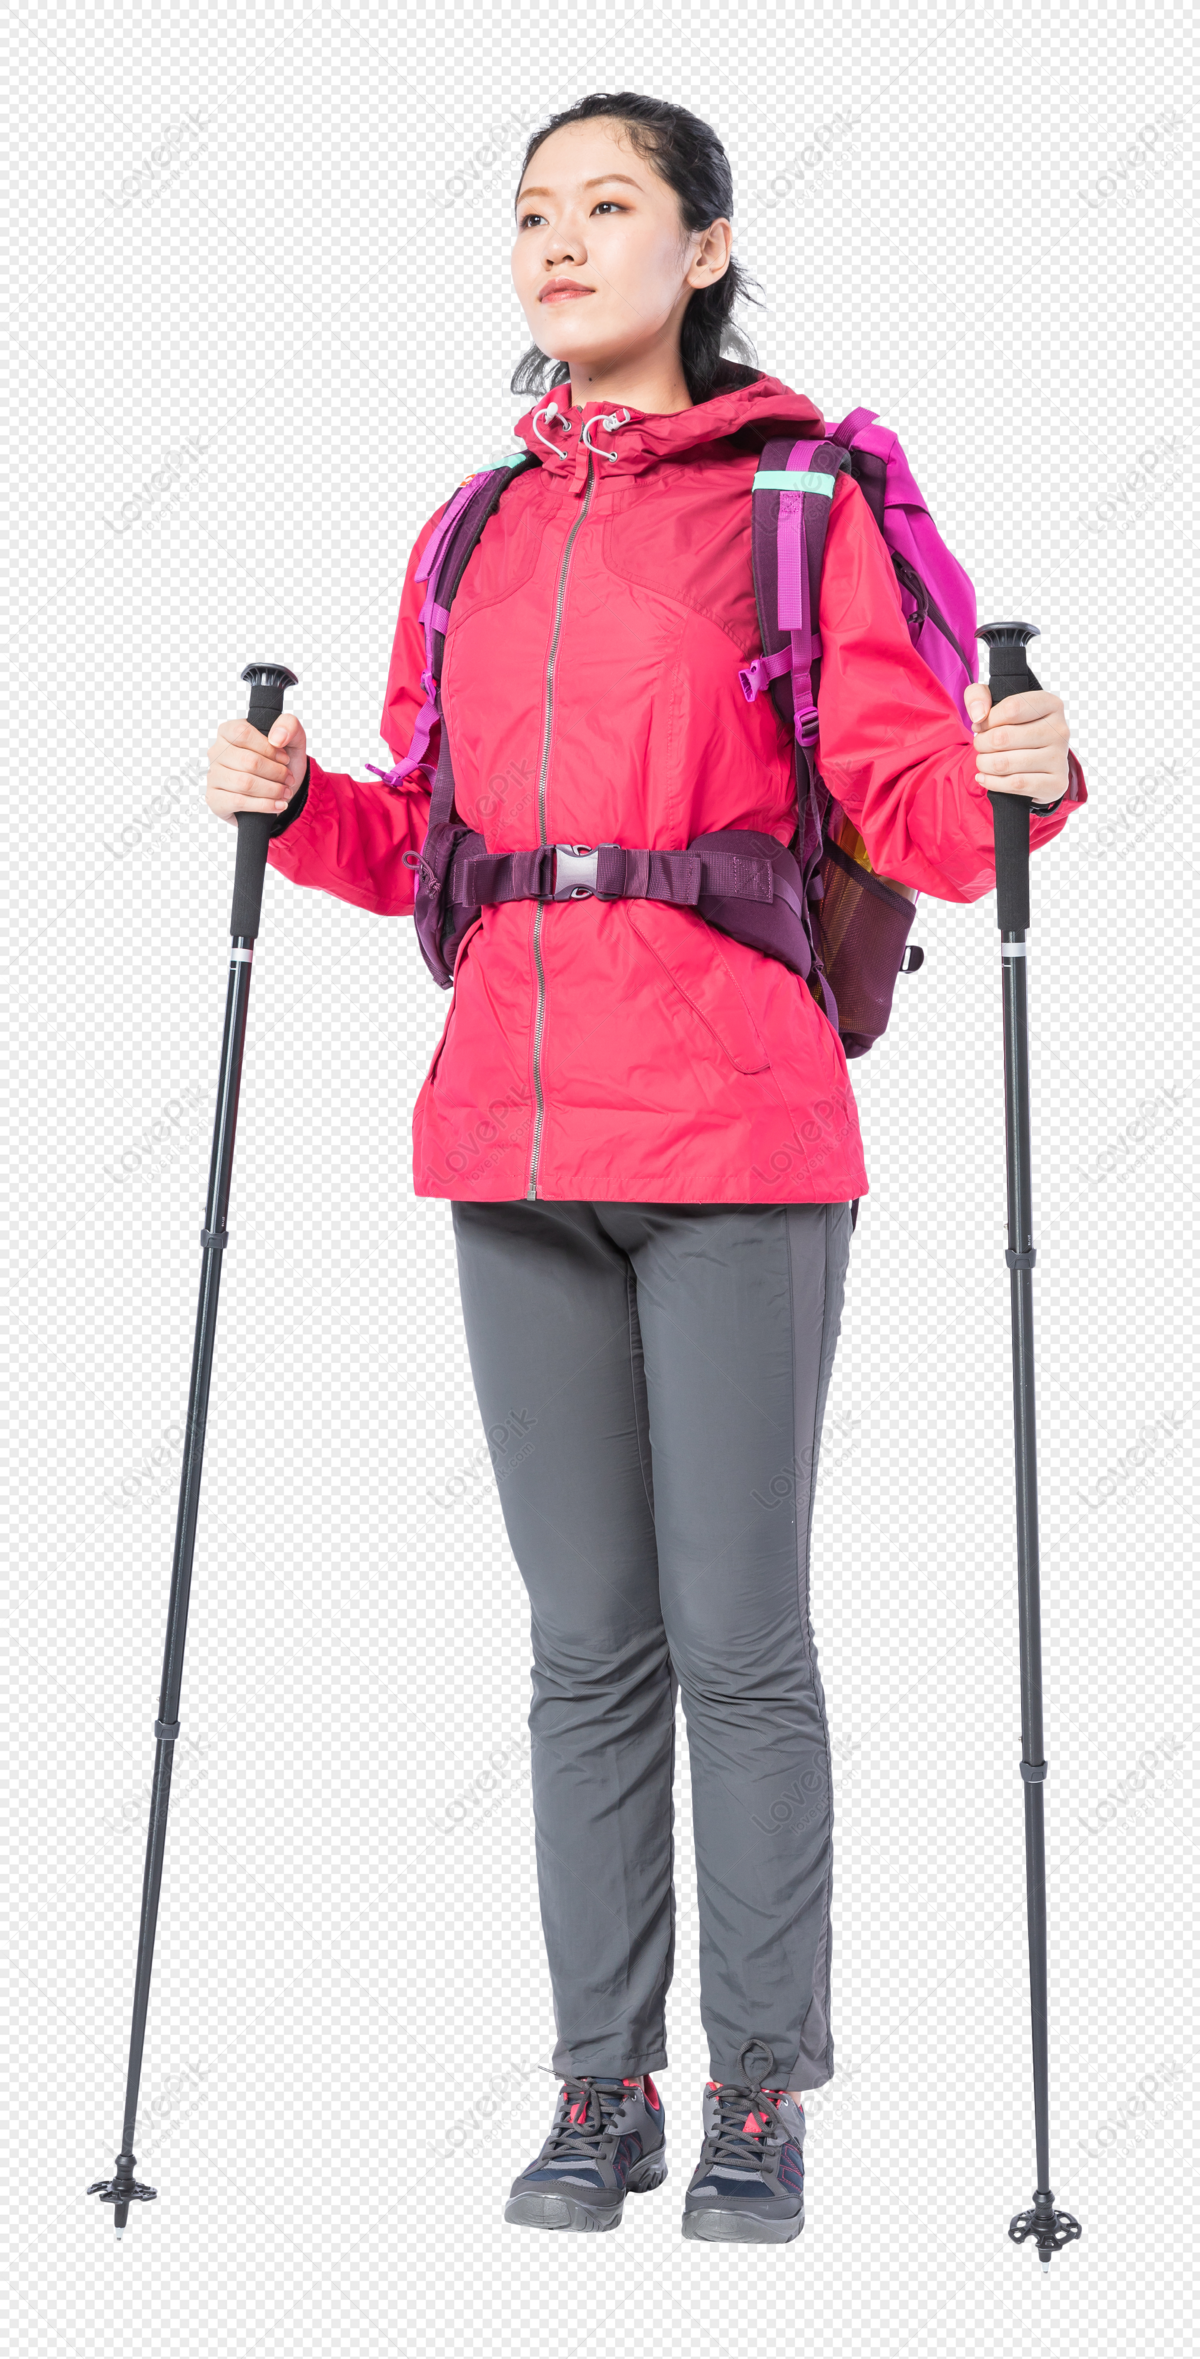 Hiking Young Women, Color Light, Holding Light, Light Poles PNG ...